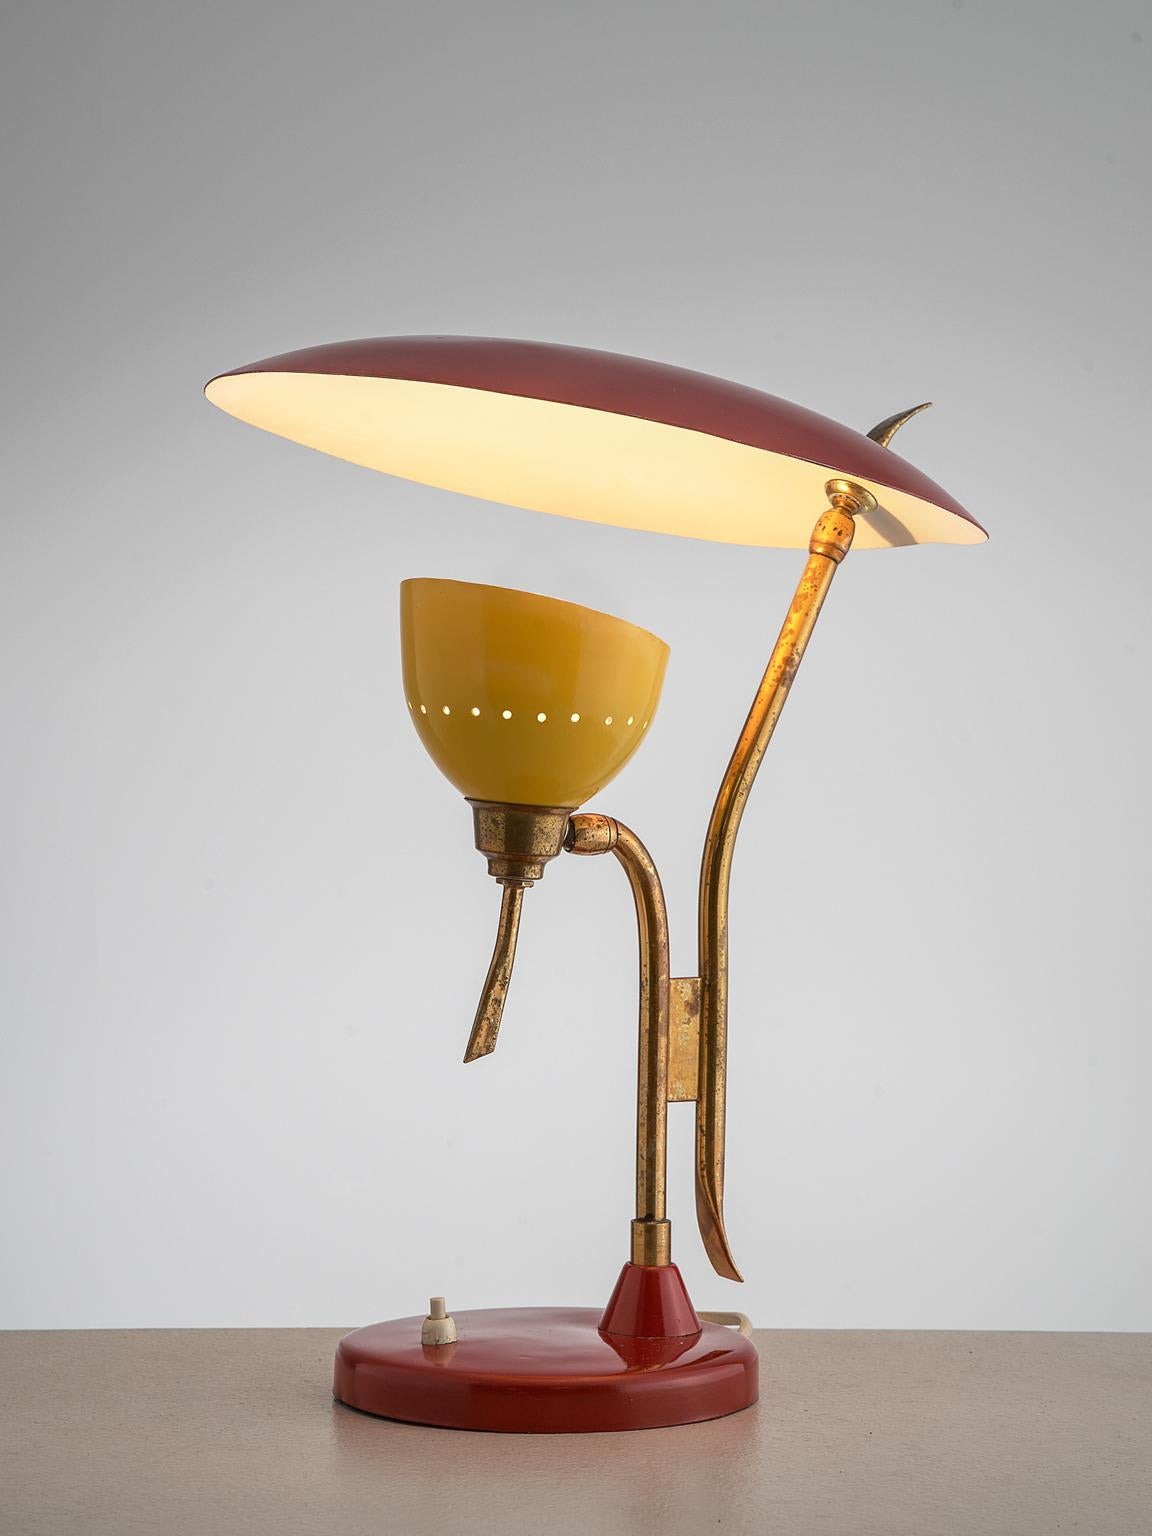 Lumen, table lamp, red and yellow metal and brass, Italy, 1950s.

This 1950s adjustable red with yellow light is manufactured by Lumen. The metal shade holding the lamp is directed upwards to another shade. This creates a beautiful diffuse light.